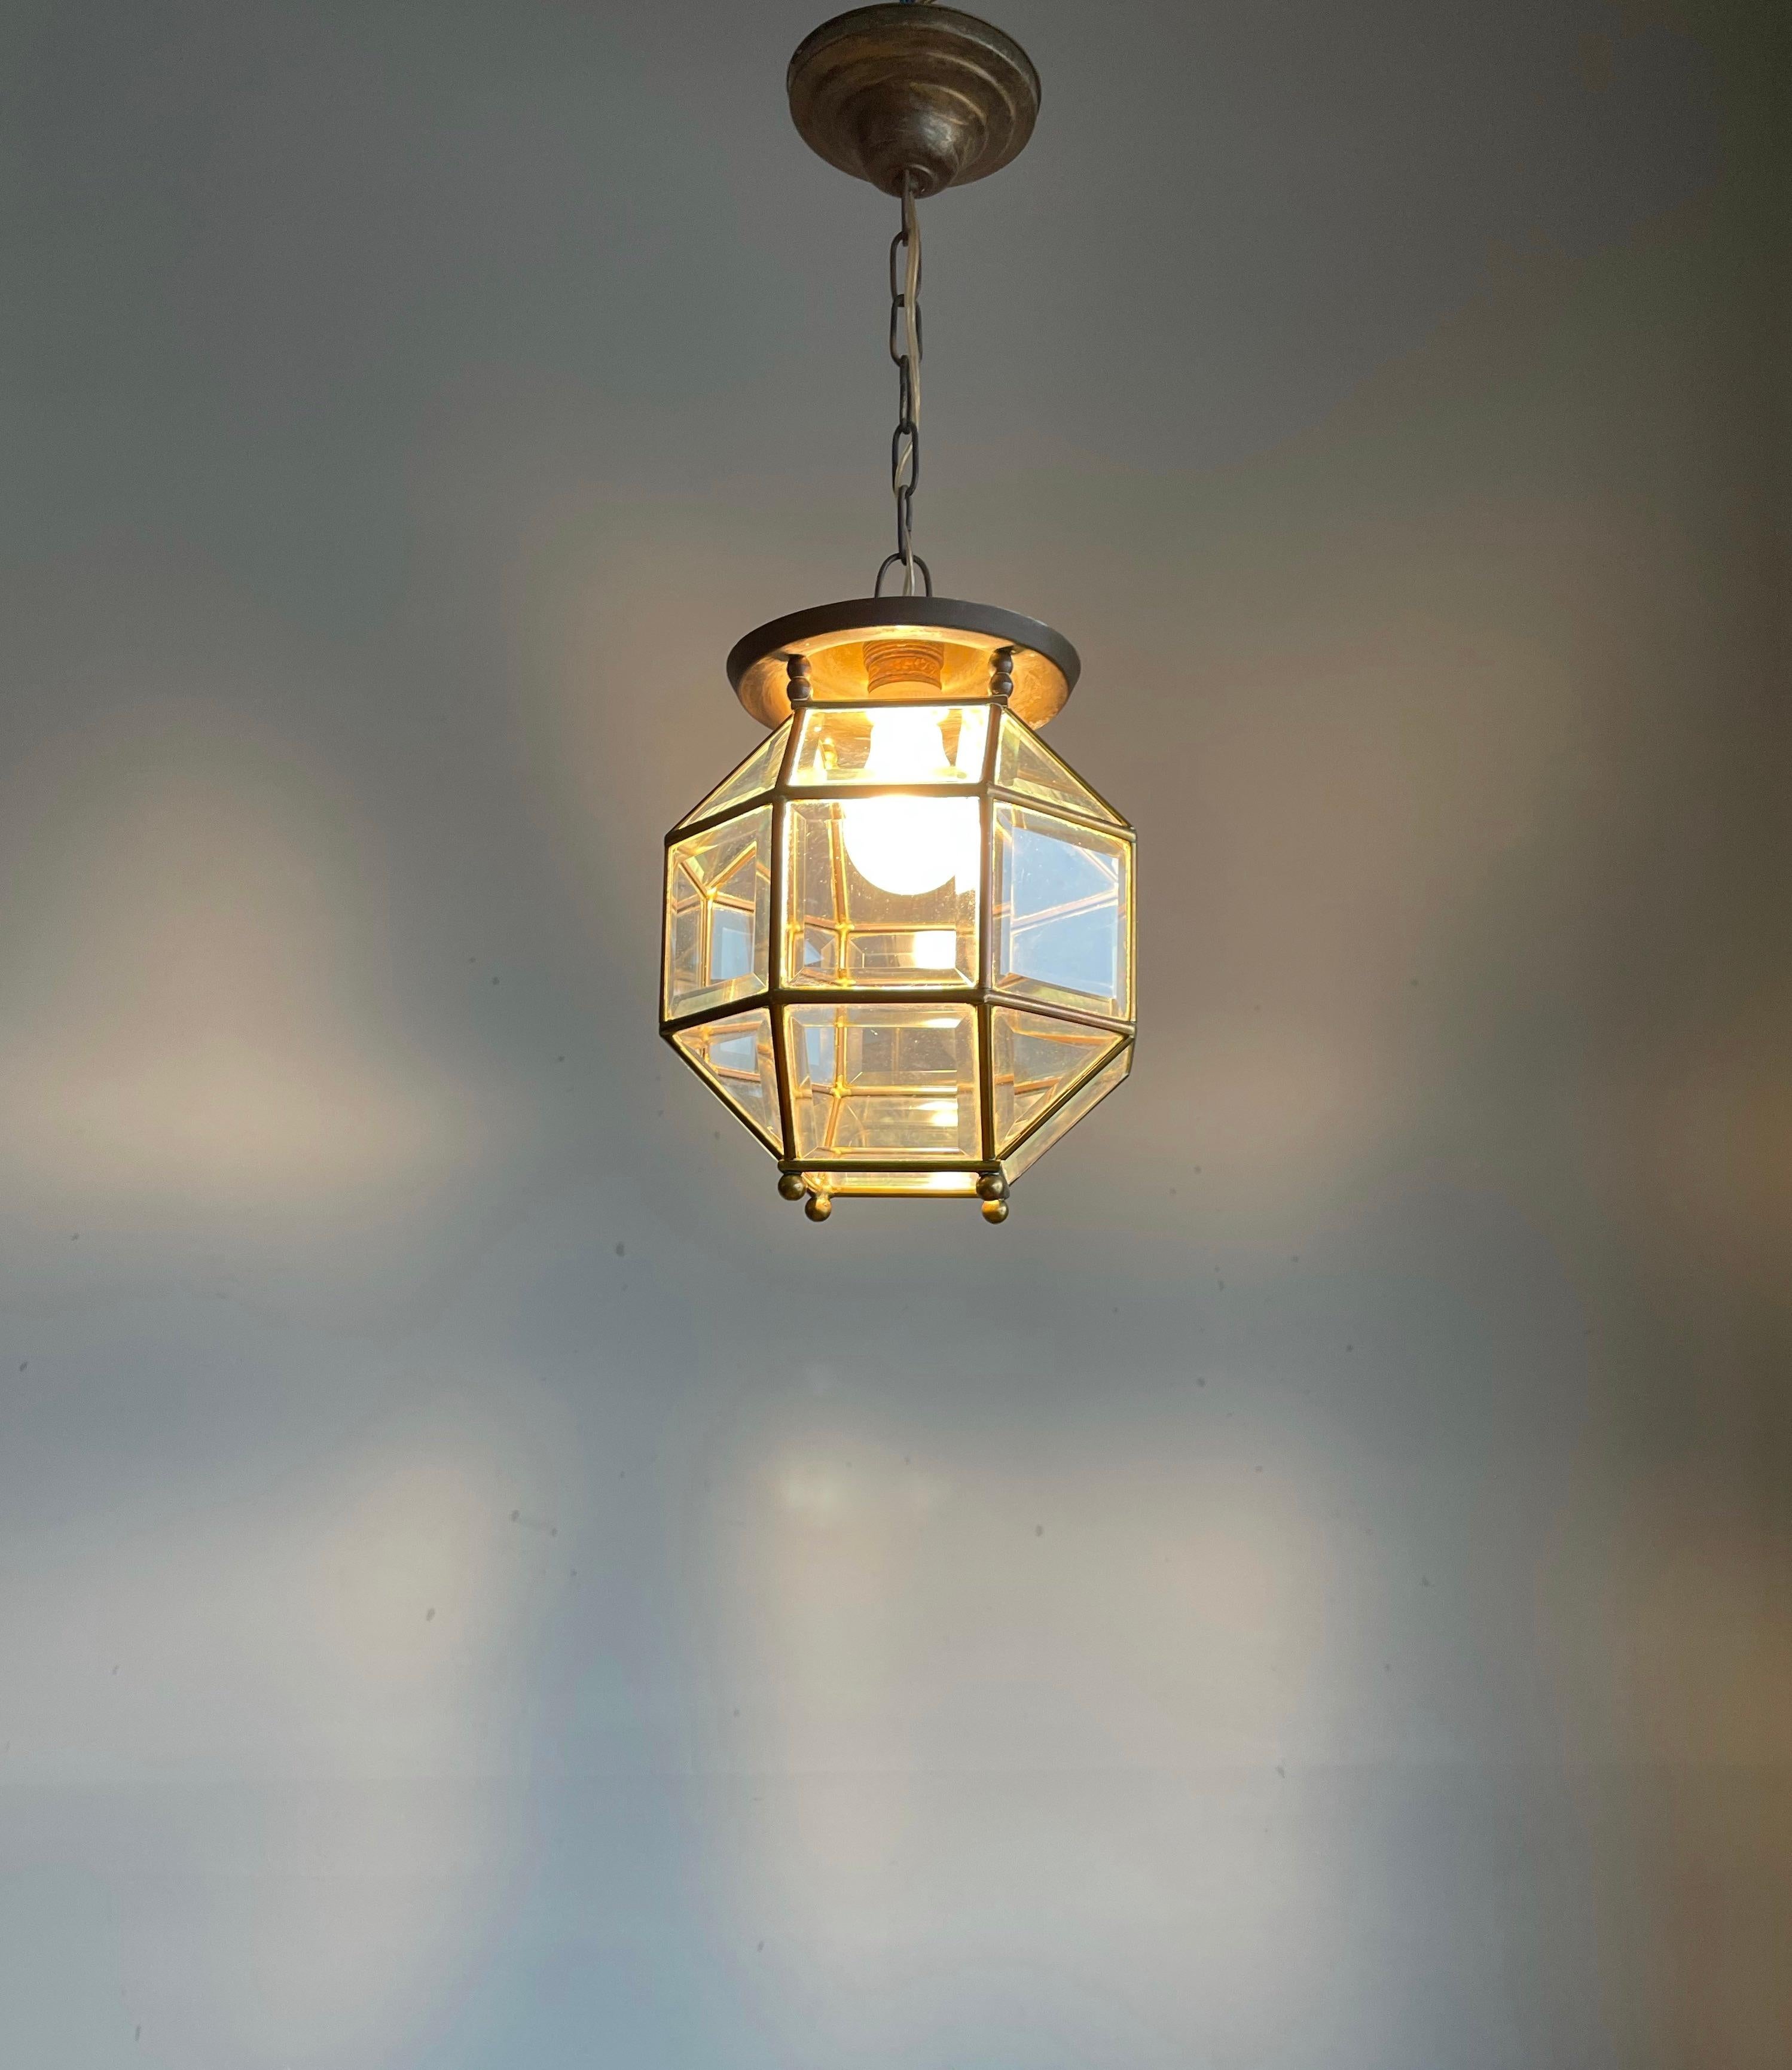 Early 1900s Beveled Glass and Brass Pendant Cubic Adolf Loos Style Ceiling Light 10